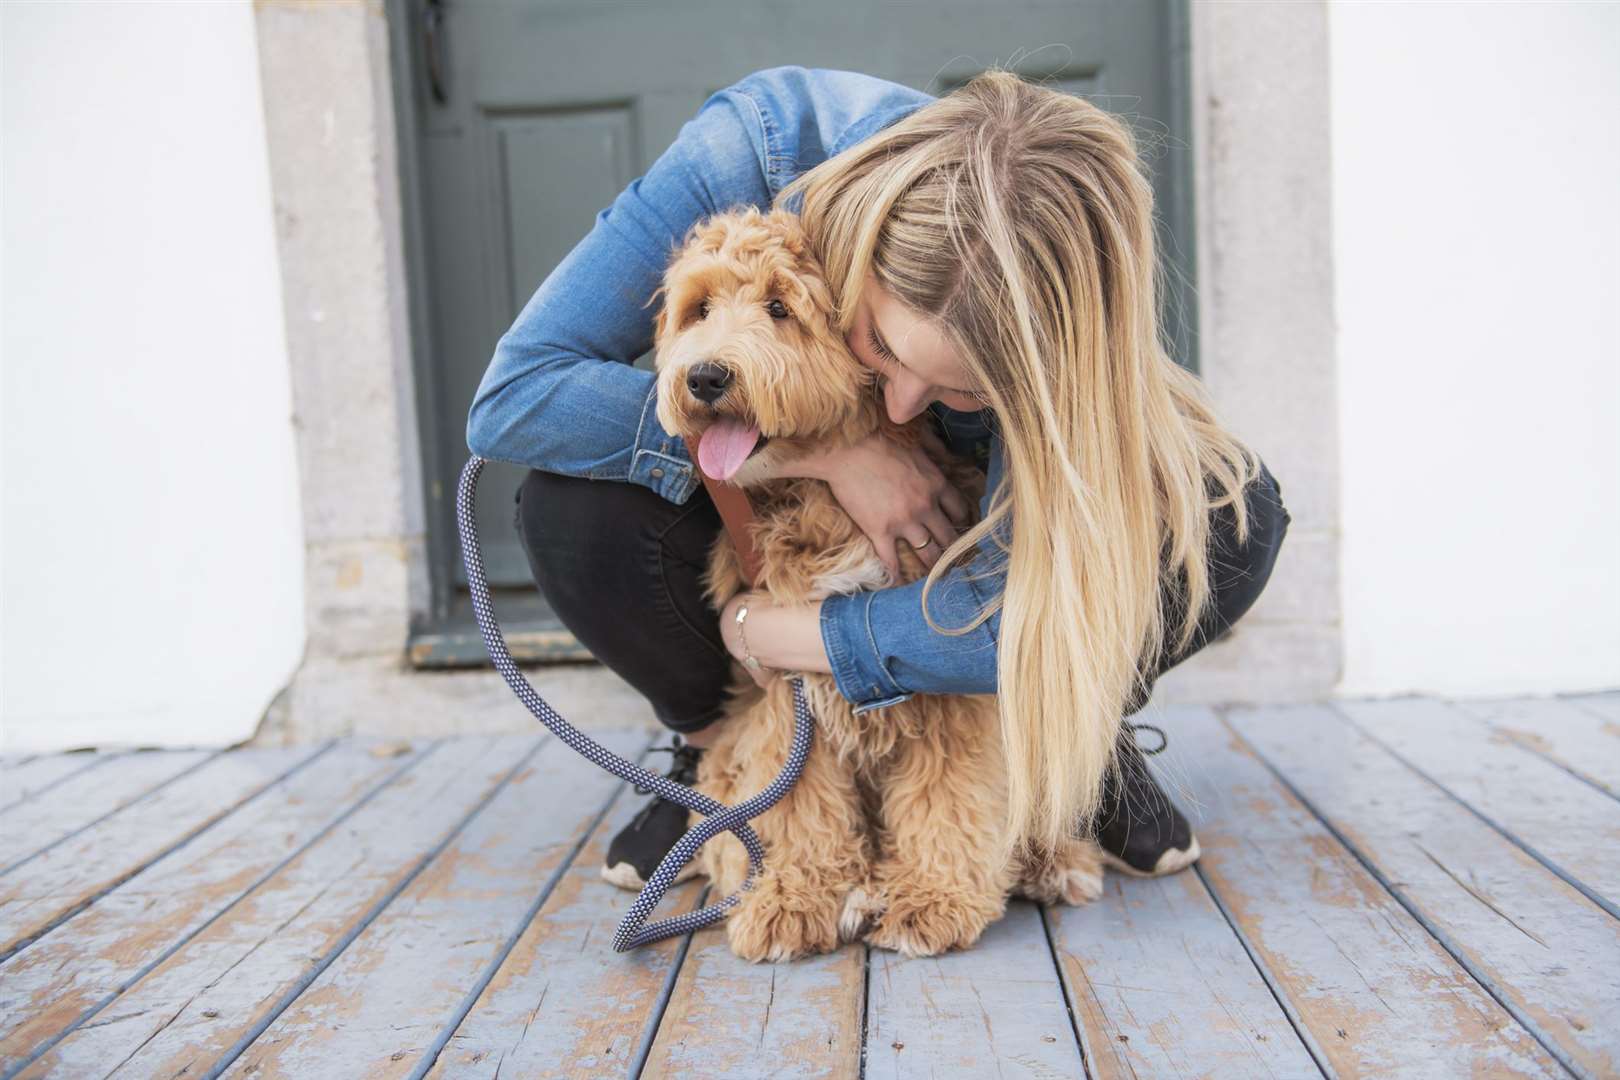 A pleasant walk with your pooch can strengthen your connection with them. Stock picture